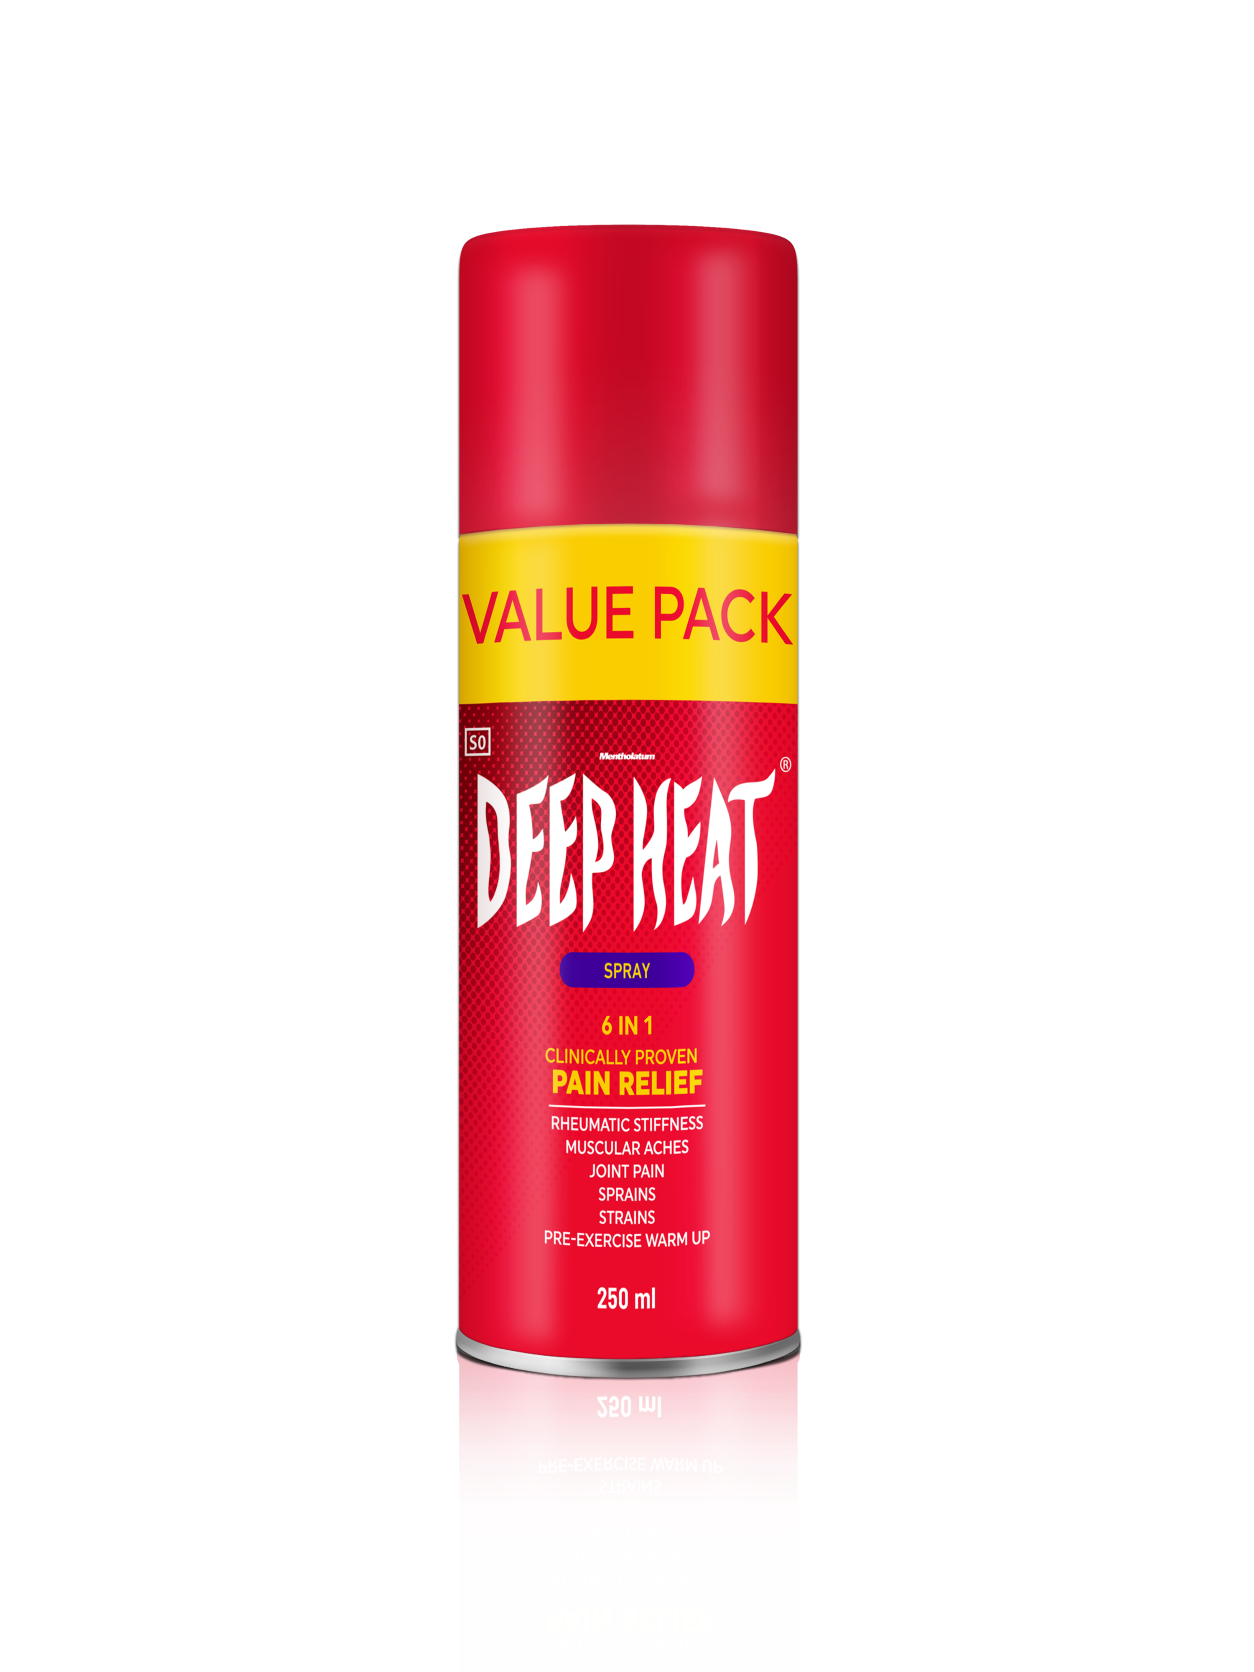 DEEP HEAT AND DEEP FREEZE EXPAND ITS RANGE TO DELIVER INCREASED CONSUMER BENEFIT